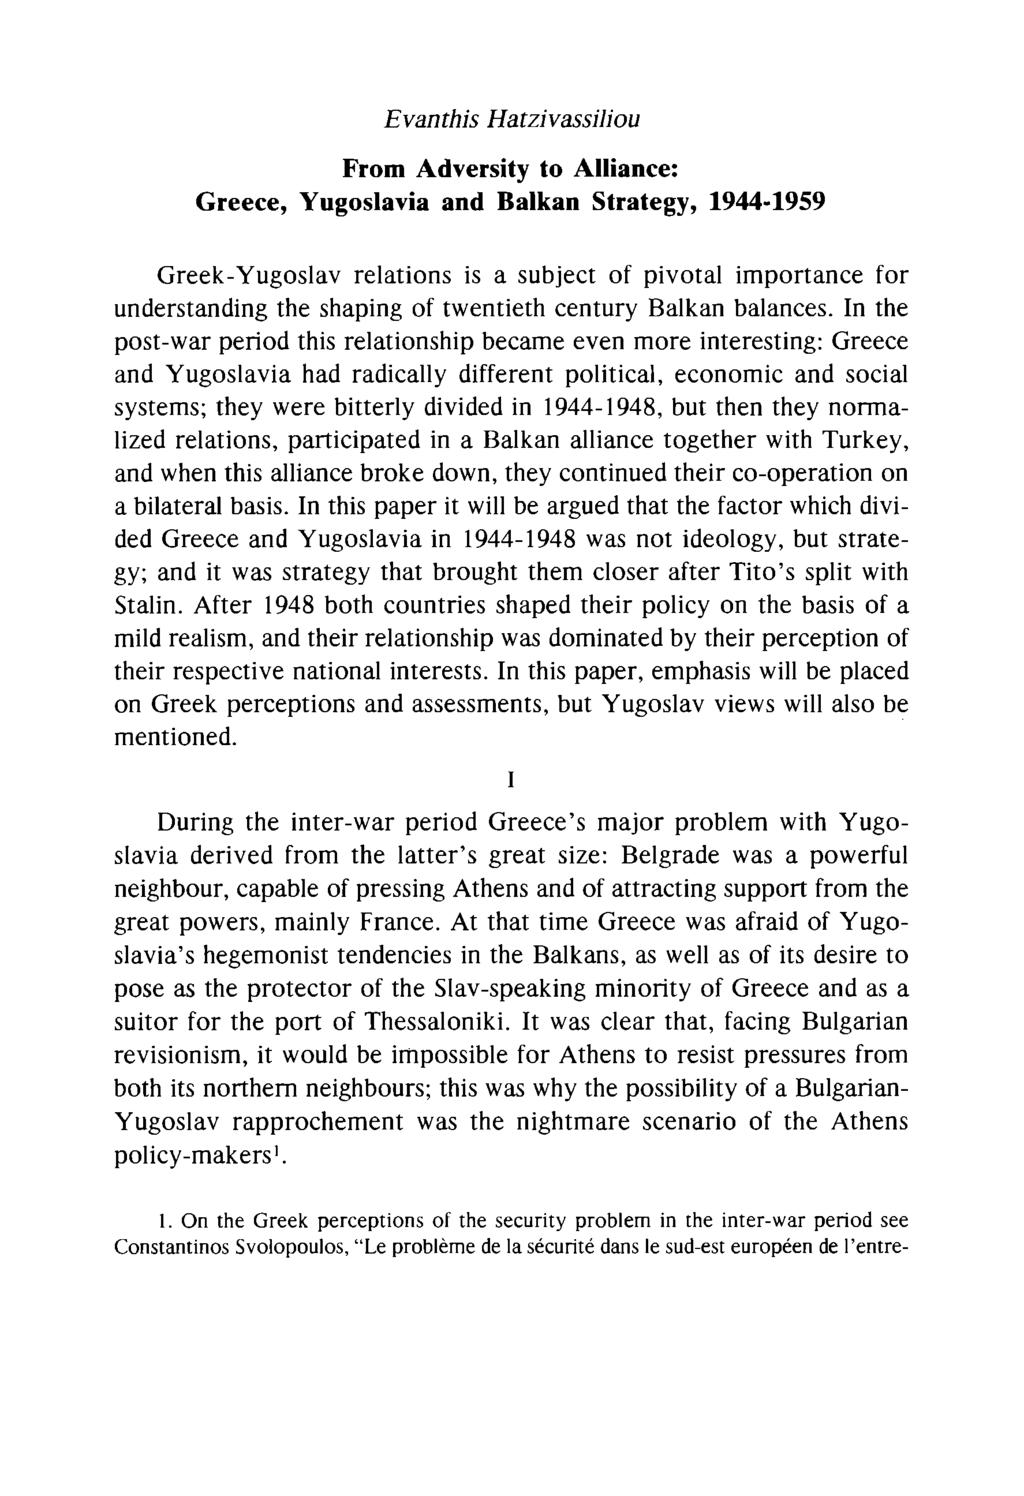 Evanthis Hatzivassiliou From Adversity to Alliance: Greece, Yugoslavia and Balkan Strategy, 1944-1959 Greek-Yugoslav relations is a subject of pivotal importance for understanding the shaping of